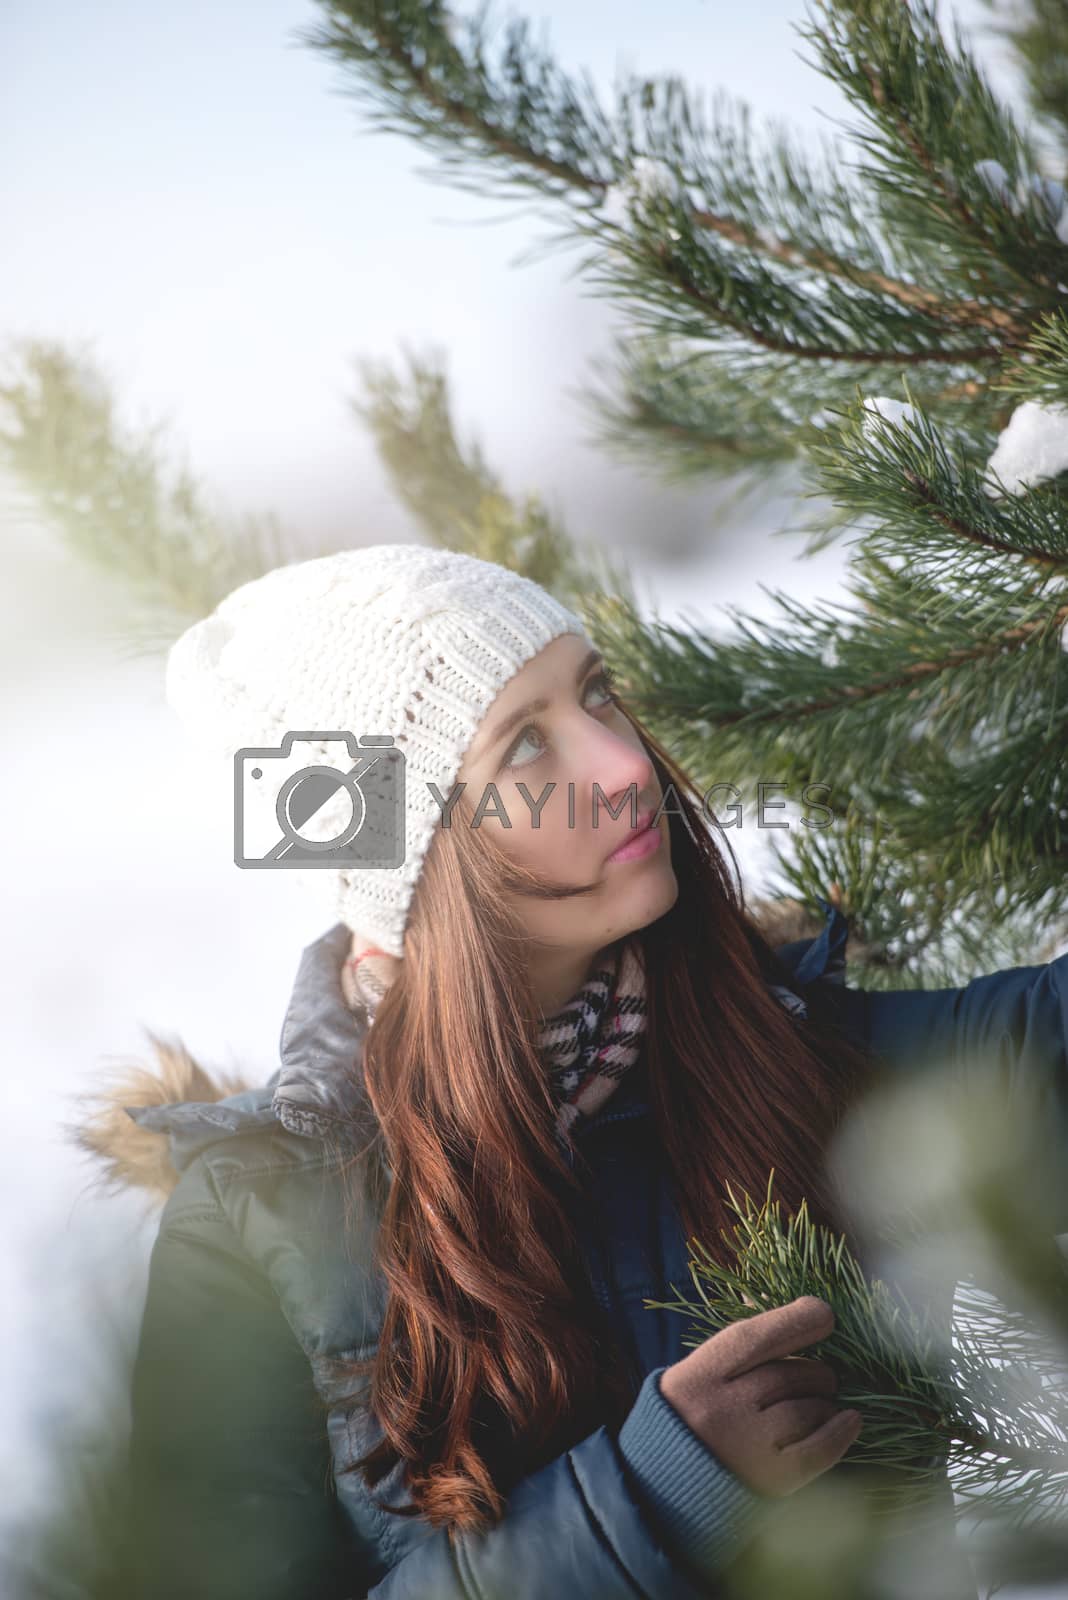 Royalty free image of Woman in winter scenery by Brejeq